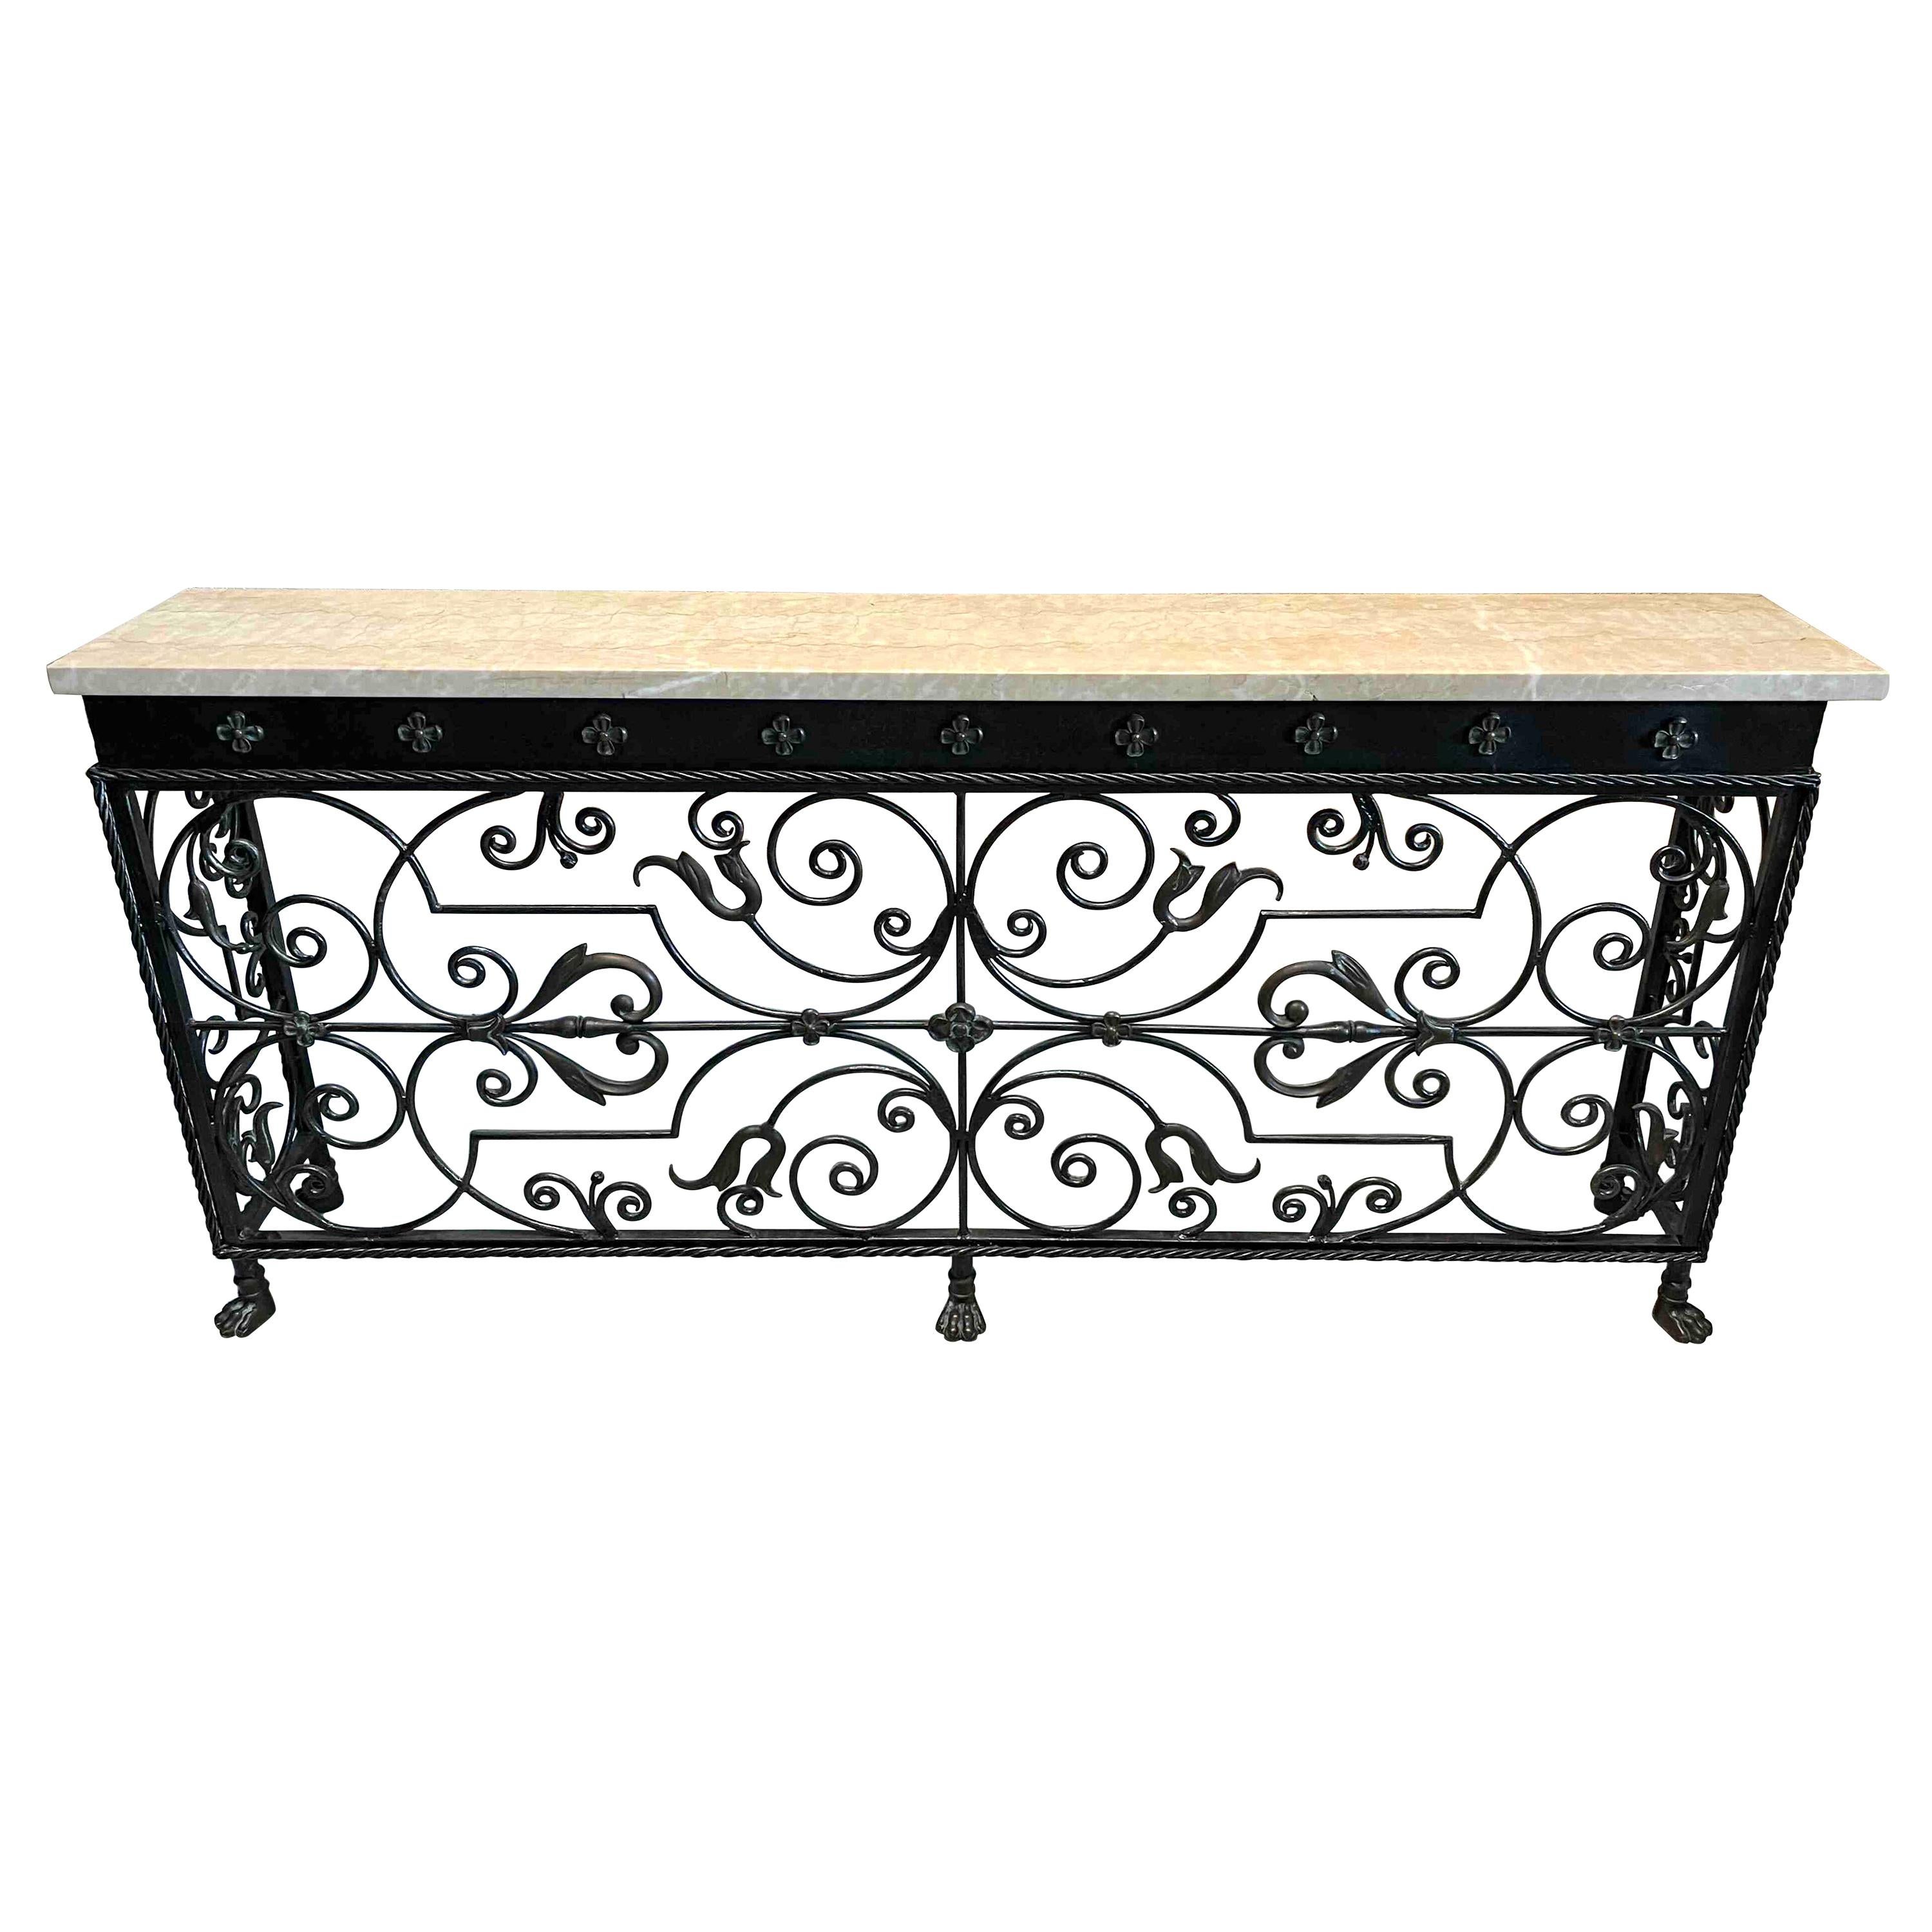 Florentine Wrought Iron & Marble Top Console